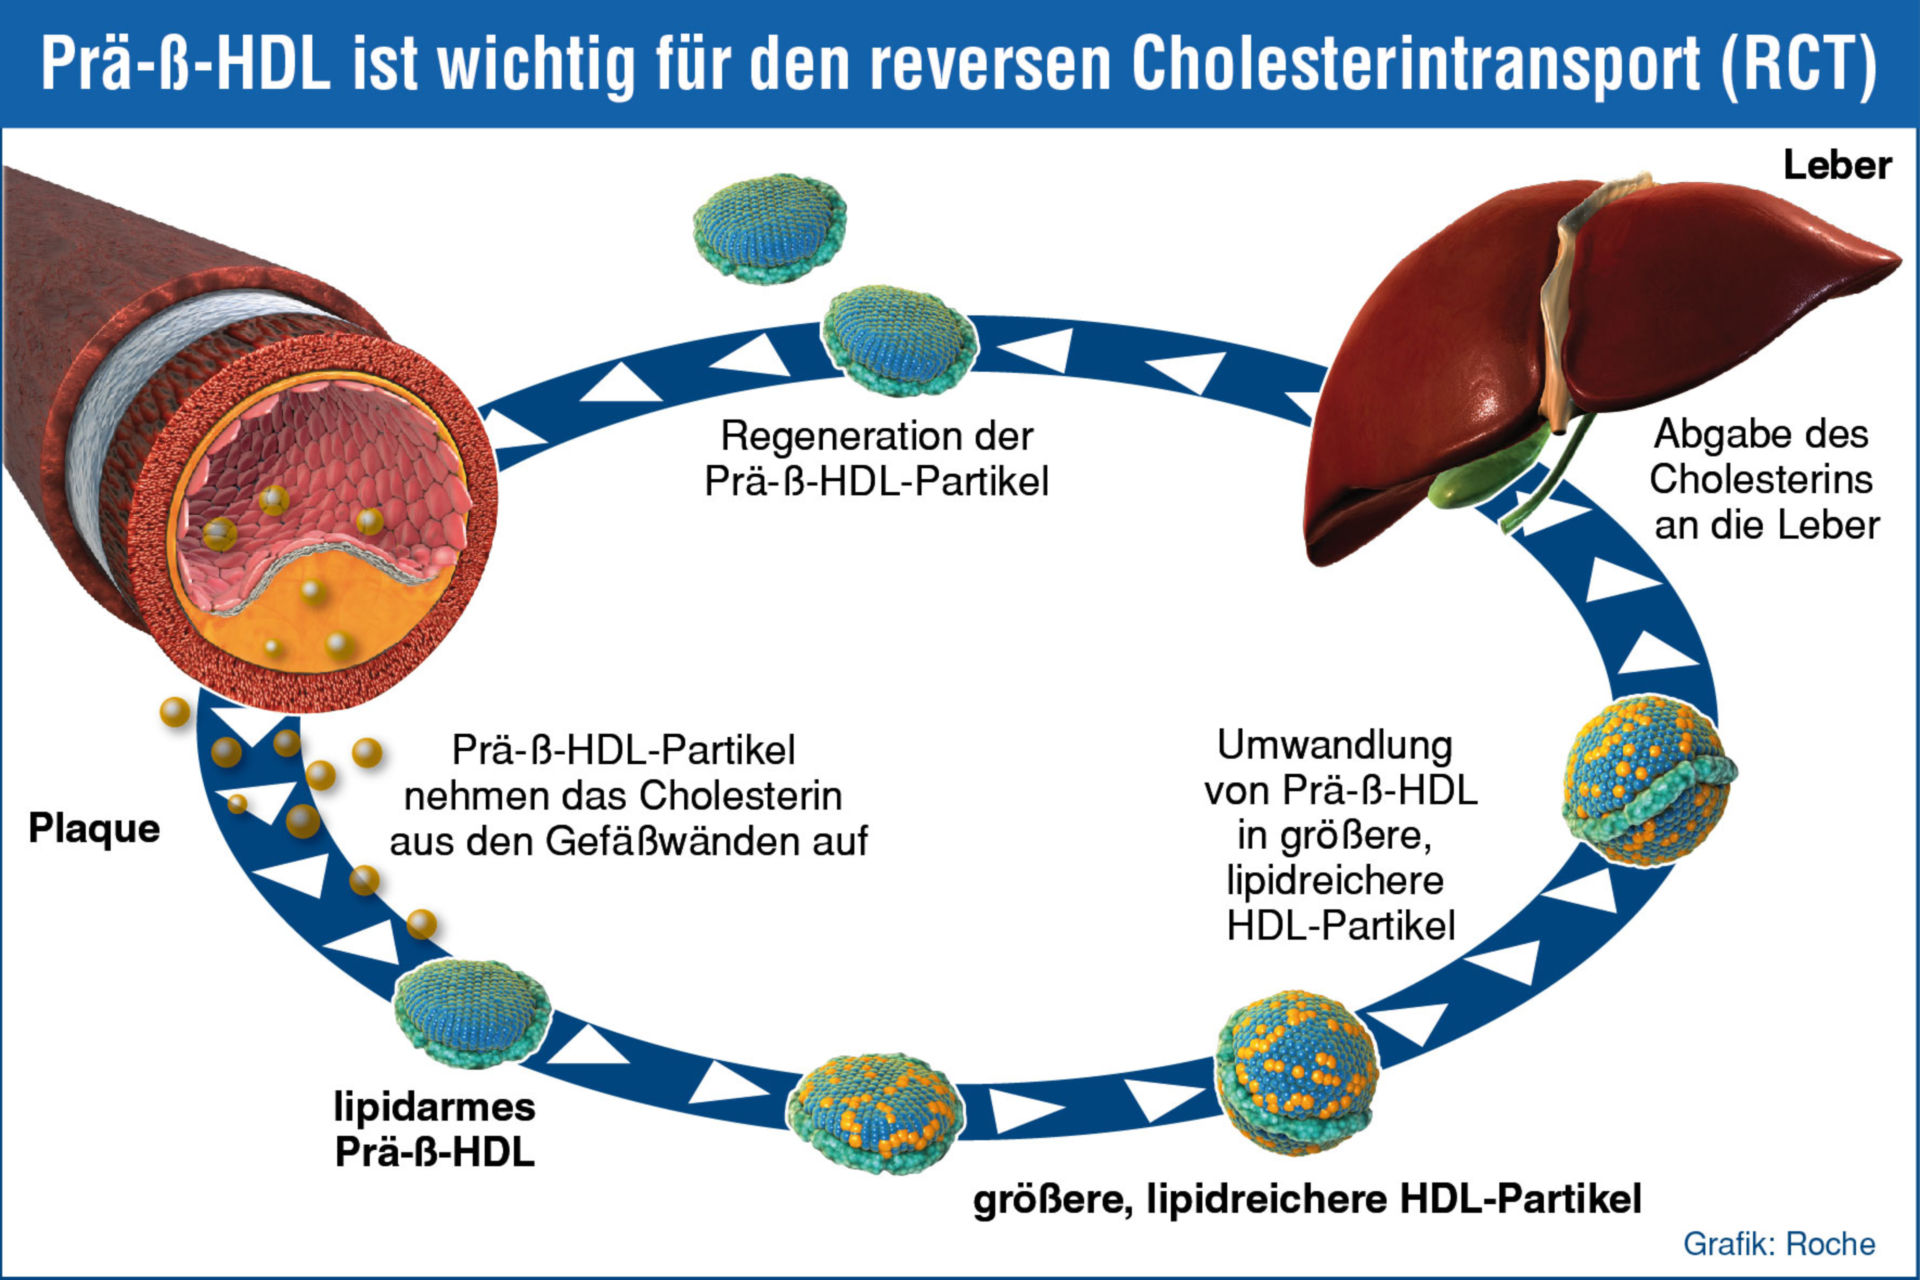 Pre-ß-HDL is important for reverse cholesterol transport (RCT)